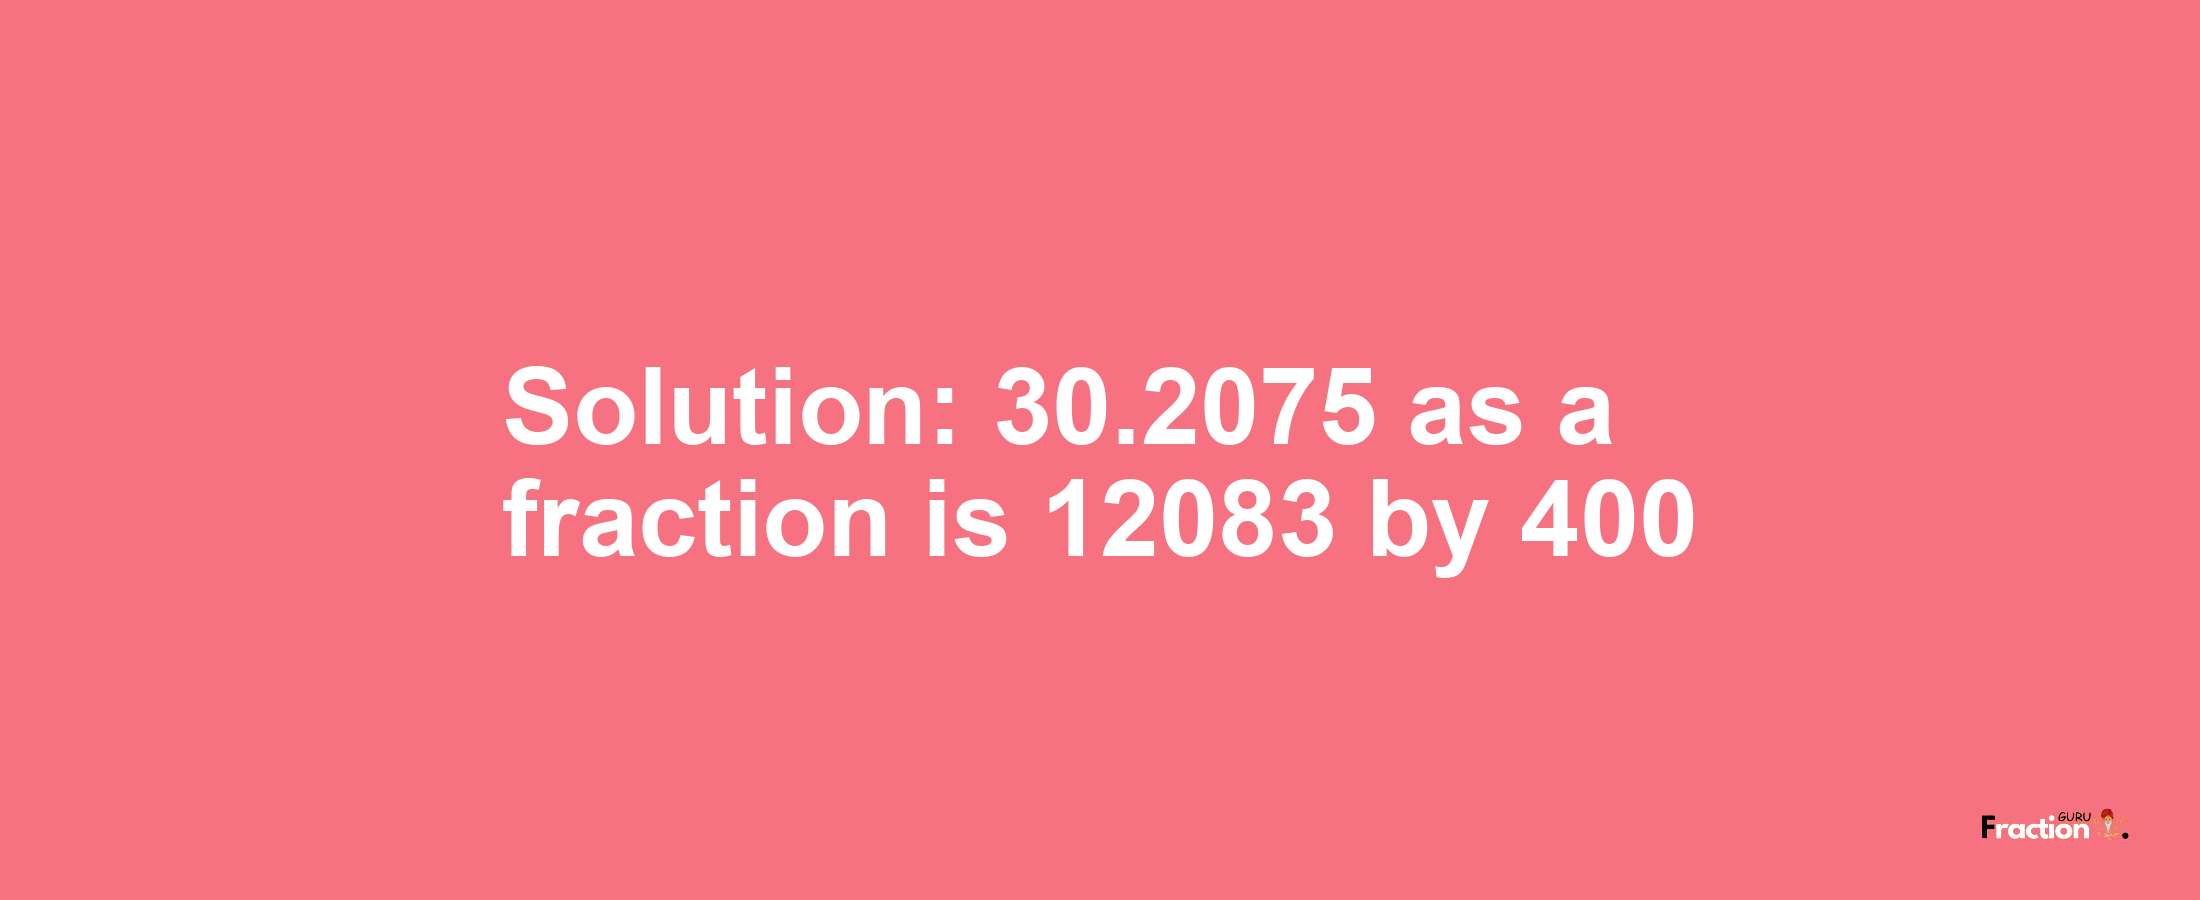 Solution:30.2075 as a fraction is 12083/400